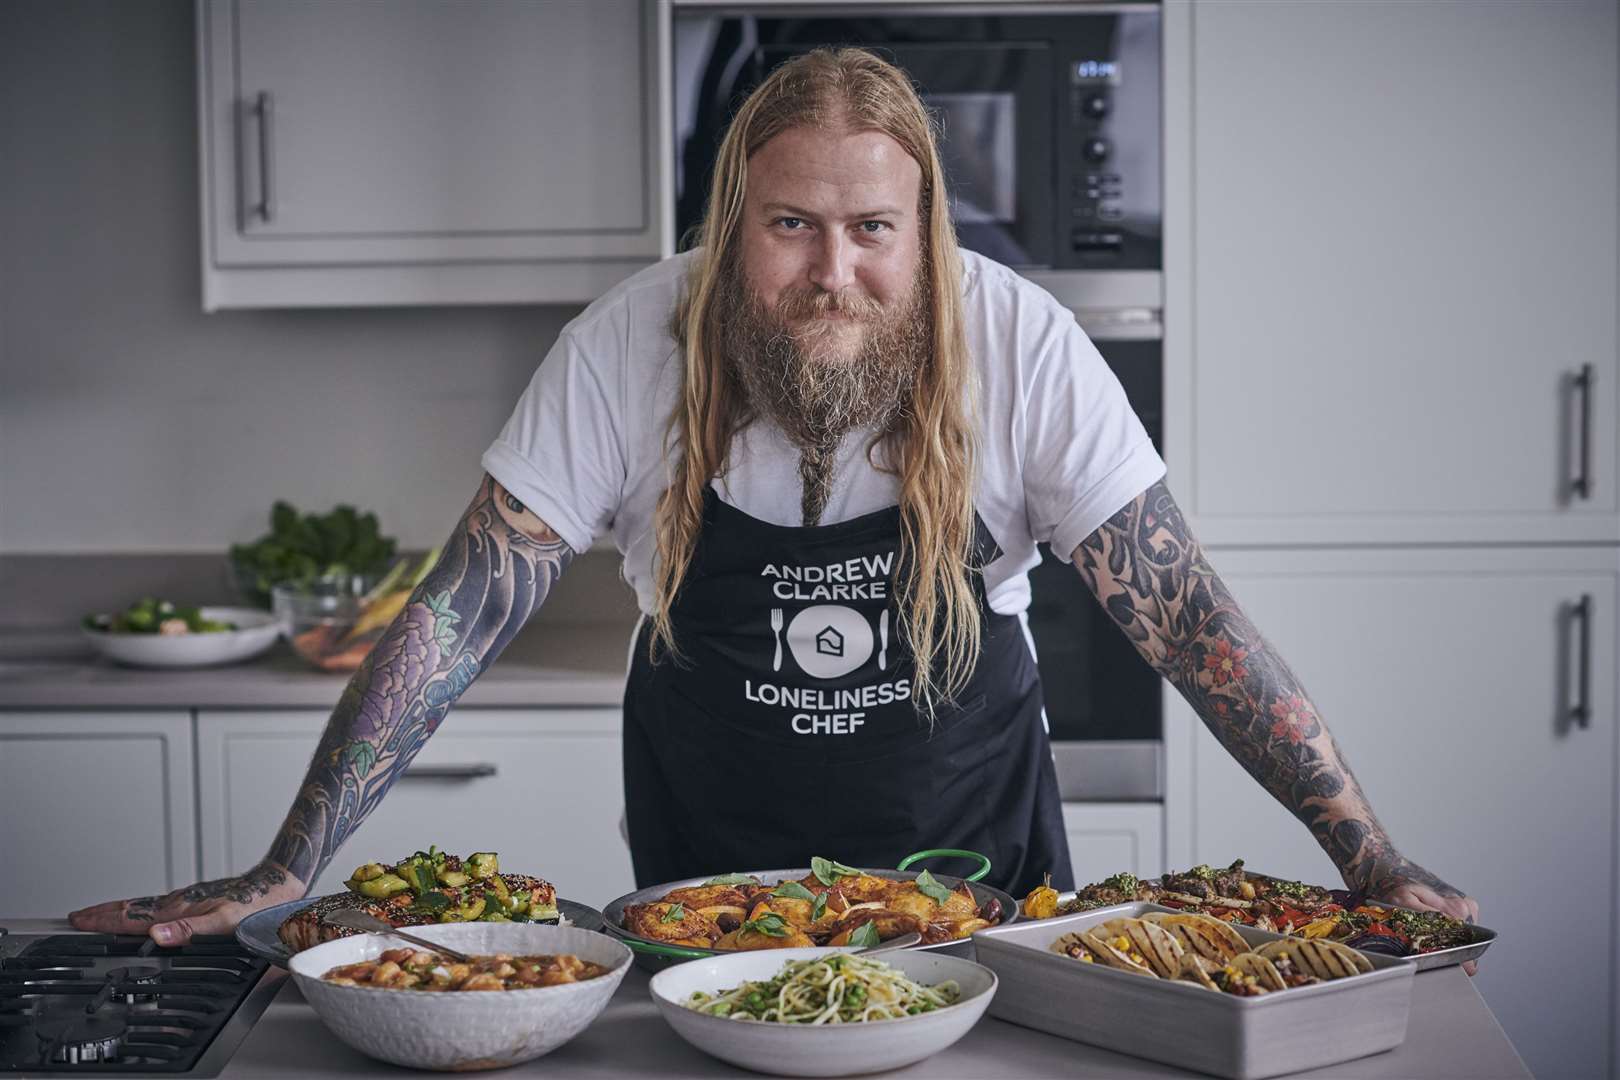 Britain's first 'National Loneliness Chef', Andrew Clarke had aspirations of becoming a rock guitarist before a career in catering called. Photo credit: SpareRoom/Campaign to End Loneliness (18287713)